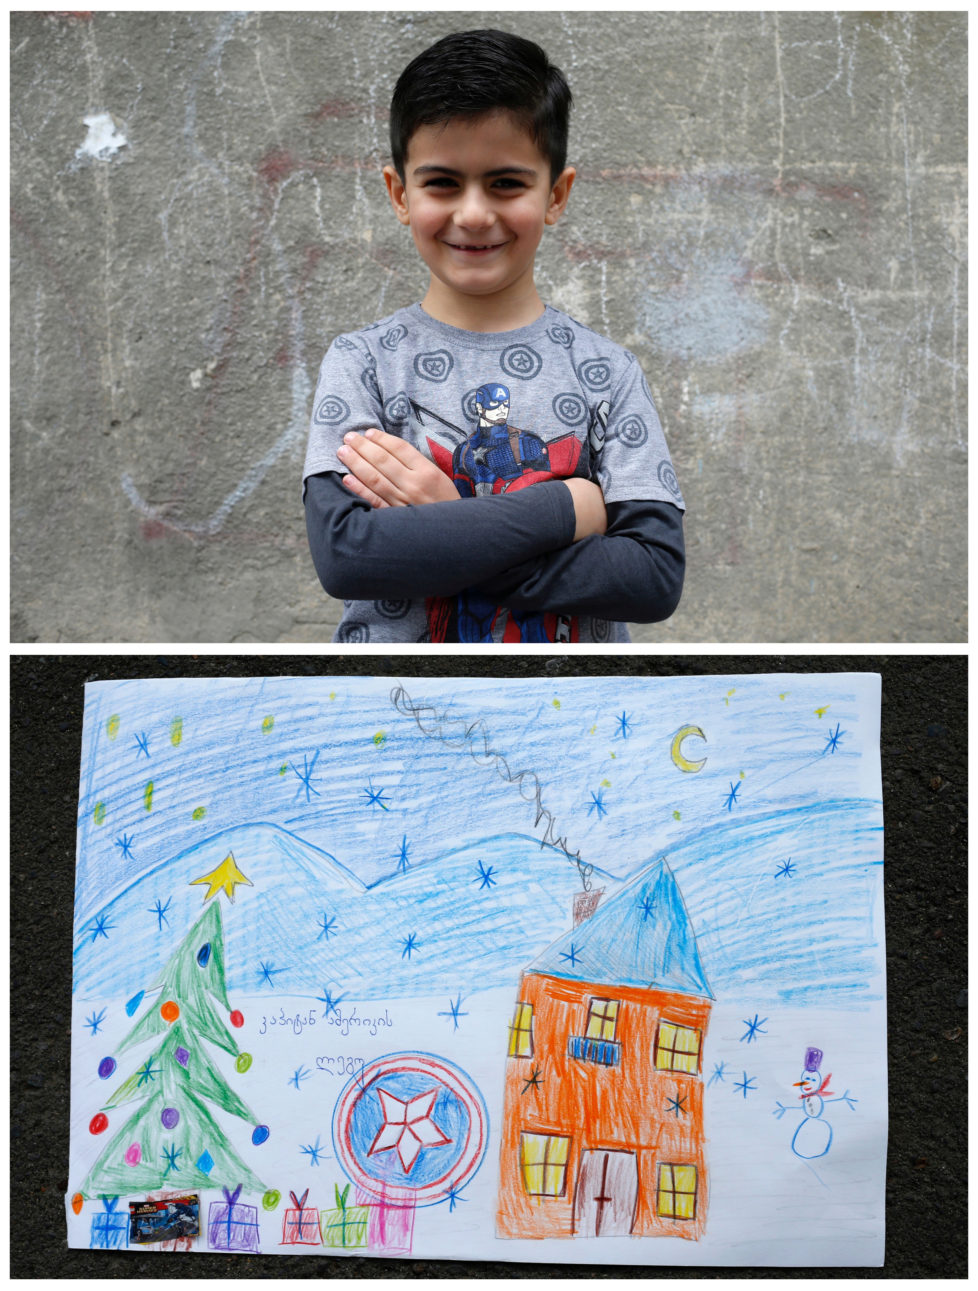 A combination picture shows Sandro, 6, posing for a photograph (top) and his drawing of what he wants to get from Santa, in Tbilisi, Georgia, November 19, 2016. Sandro wants to get "Captain America" Lego set. He believes Santa can see his drawing and guess what he wants. He is waiting for his gift to be found under the Christmas tree. Reuters photographers around the world asked children to draw what they wanted to receive from Santa for Christmas. REUTERS/David Mdzinarishvili SEARCH "CHRISTMAS WISHES" FOR THIS STORY. SEARCH "WIDER IMAGE" FOR ALL STORIES. - RTSV37X